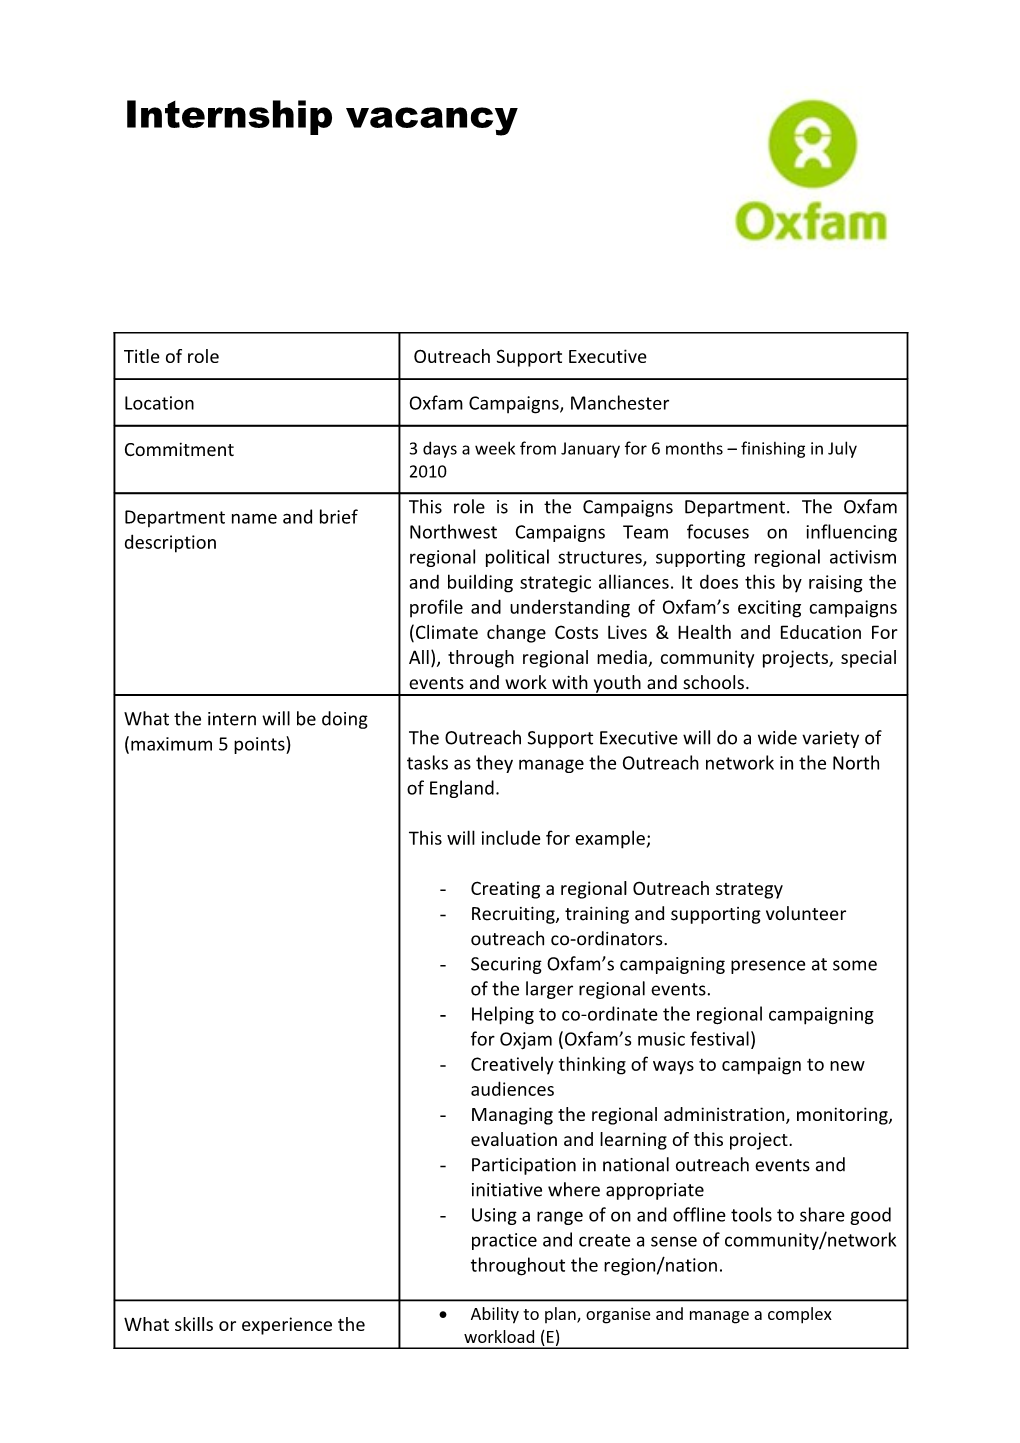 Form for Advertising a Volunteer Vacancy on the Oxfam Website